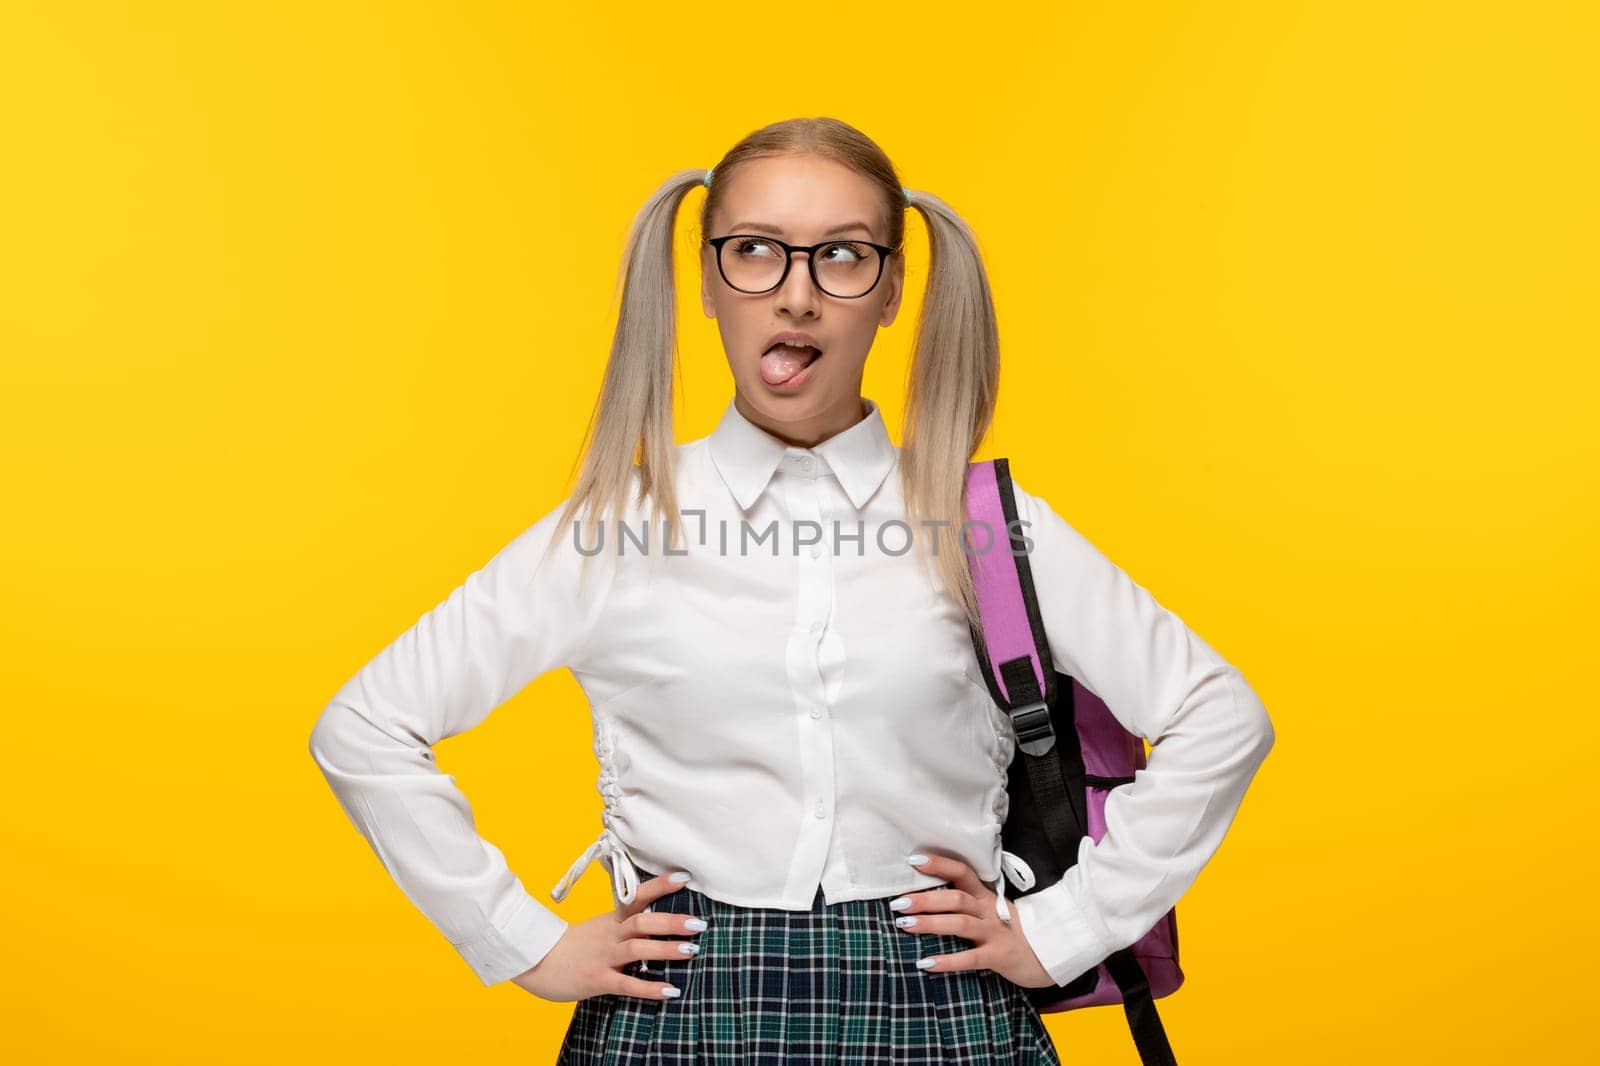 world book day blonde schoolgirl with tongue out in glasses on yellow background